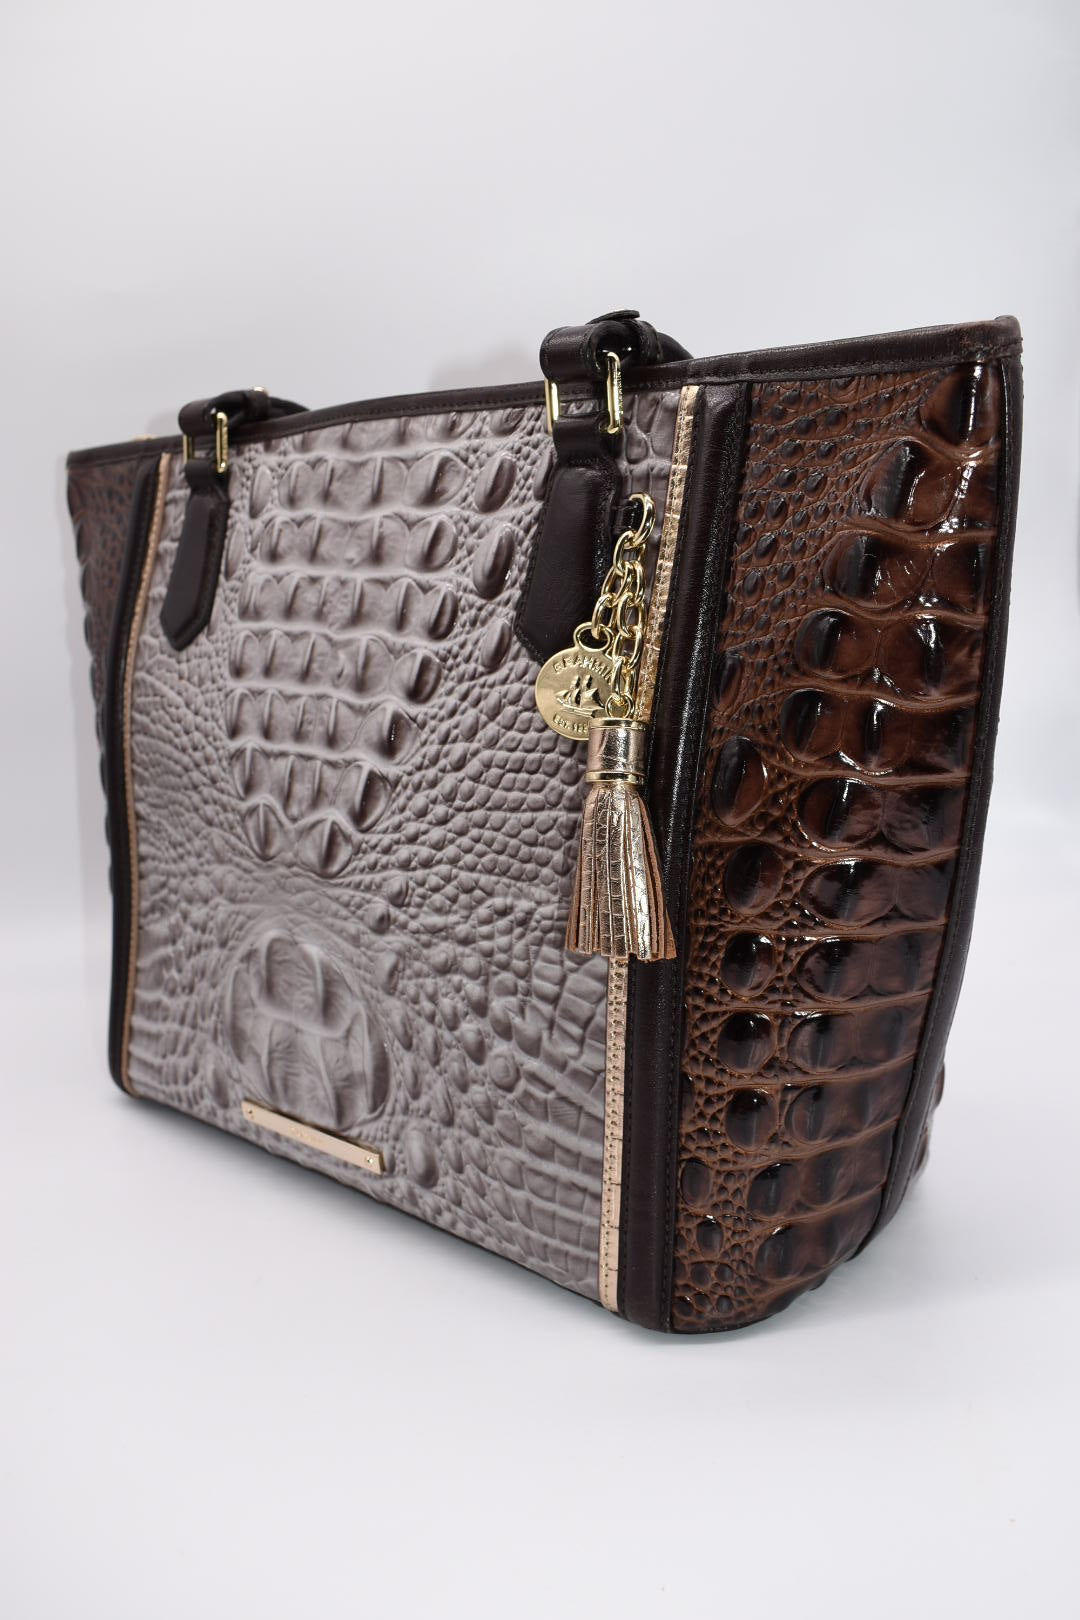 Brahmin Medium Asher Tote Bag in Quill Greco